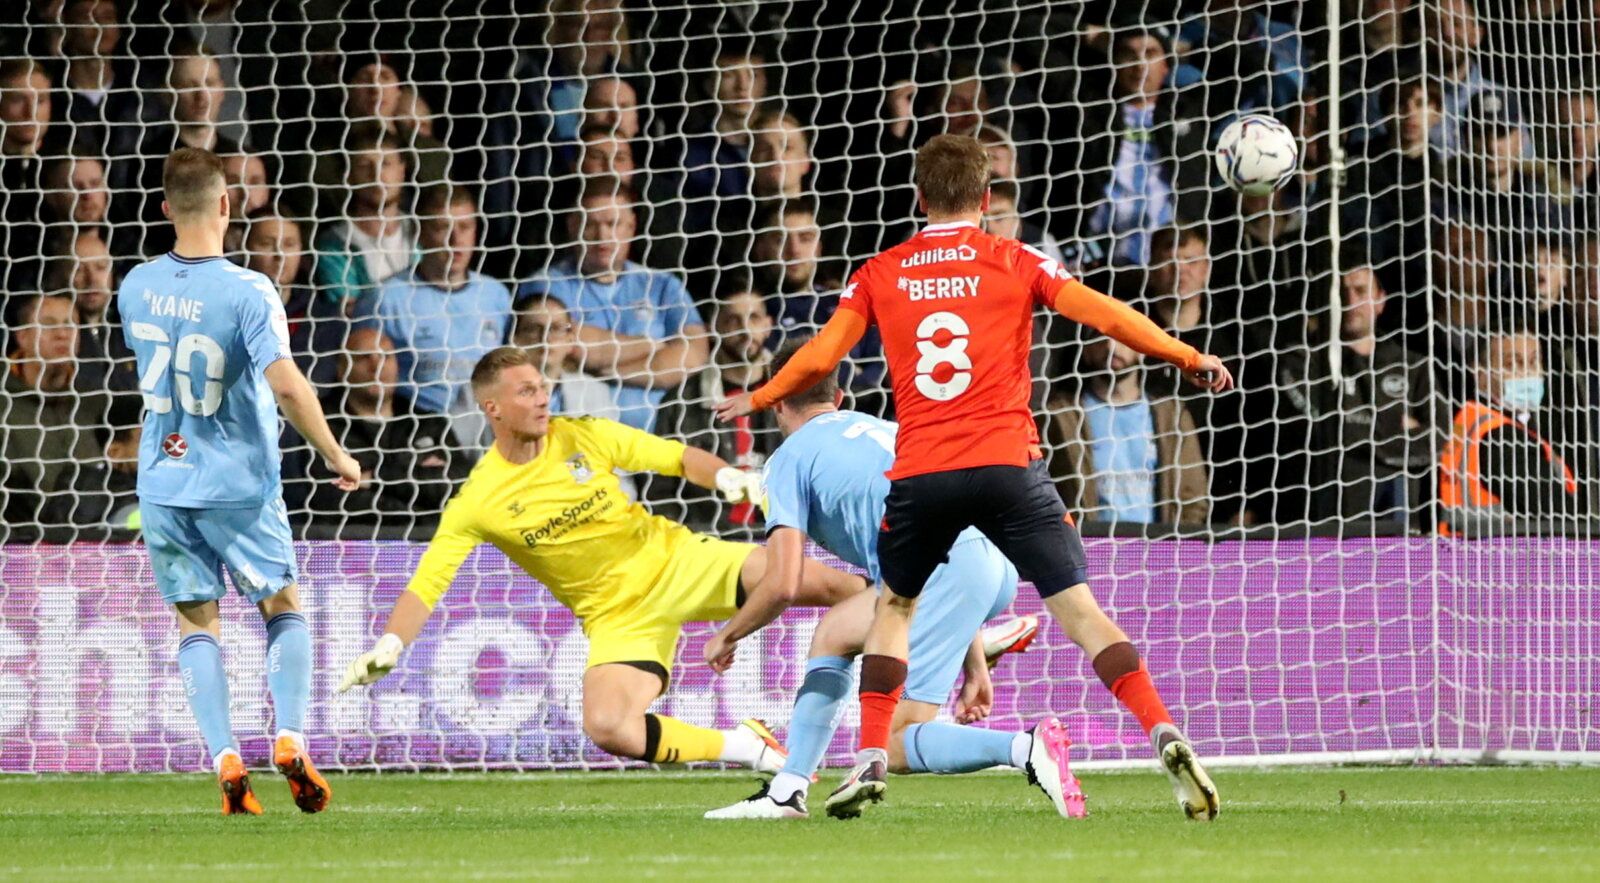 Soccer Football - Championship - Luton Town v Coventry City - Kenilworth Road, Luton, Britain - September 29, 2021 Luton Town’s Luke Berry scores their third goal  Action Images/PETER CZIBORRA  EDITORIAL USE ONLY. No use with unauthorized audio, video, data, fixture lists, club/league logos or 